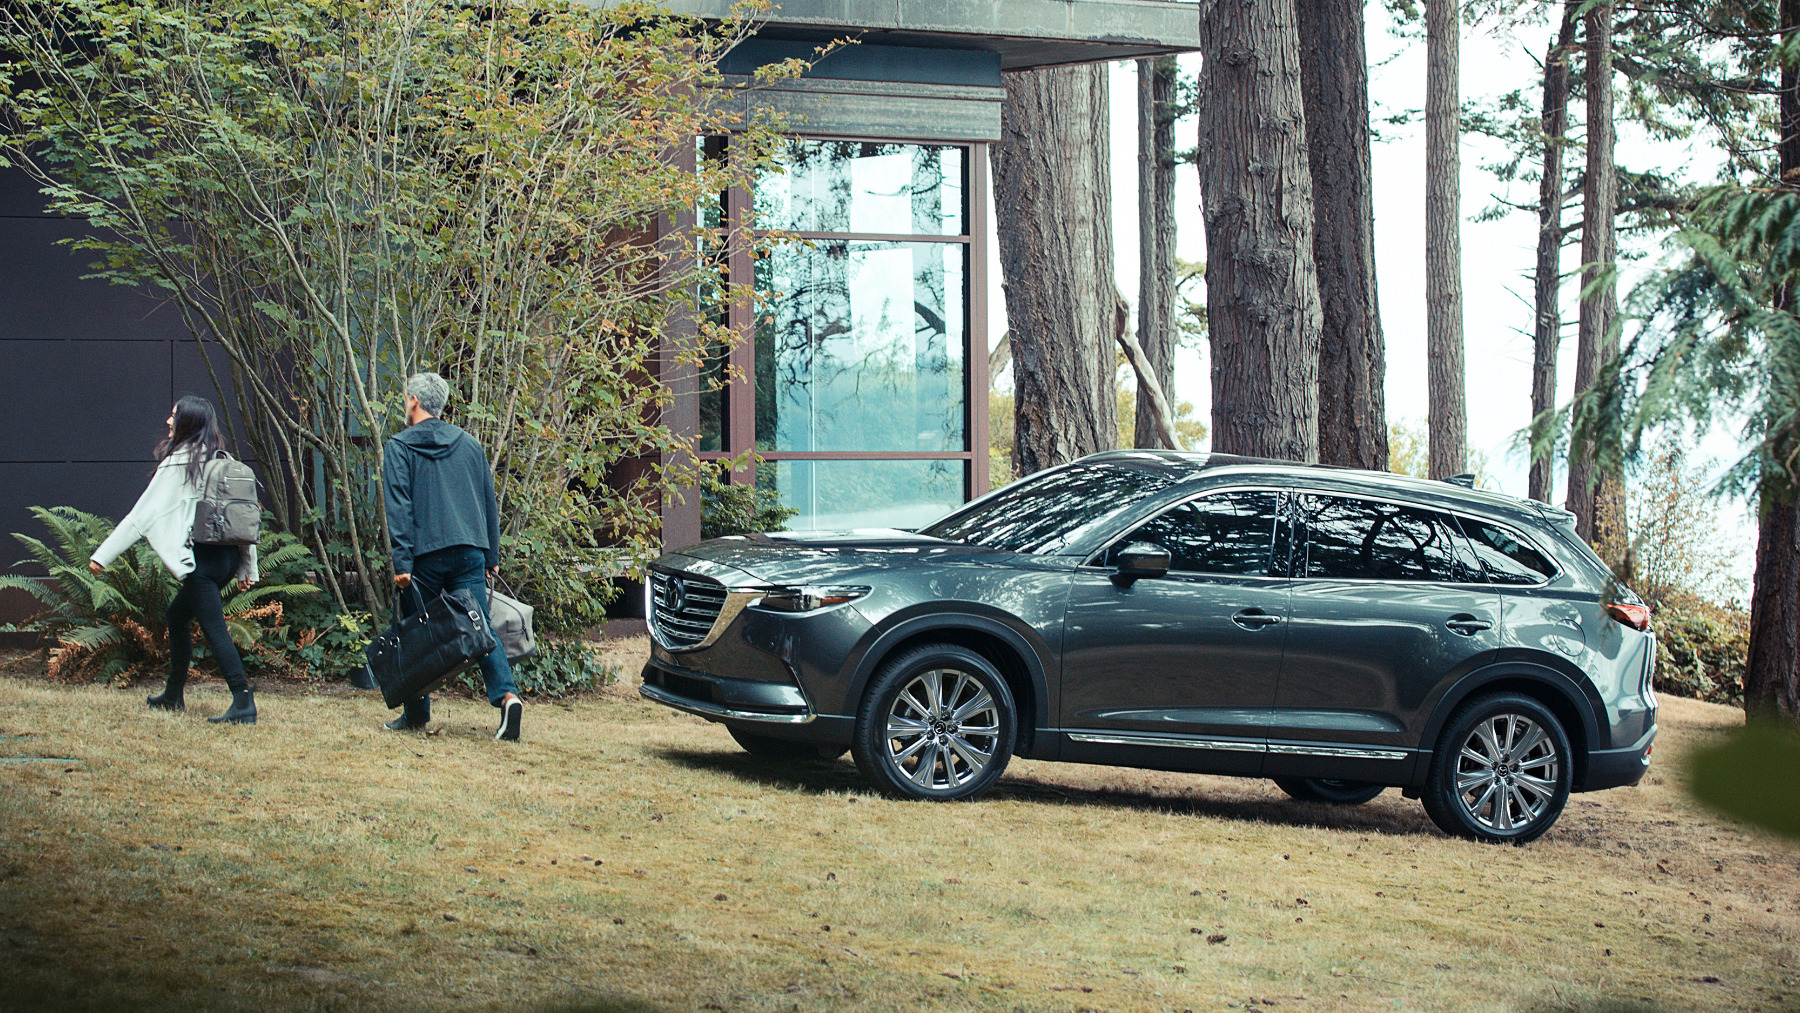 Mazda CX-9 parked countryside